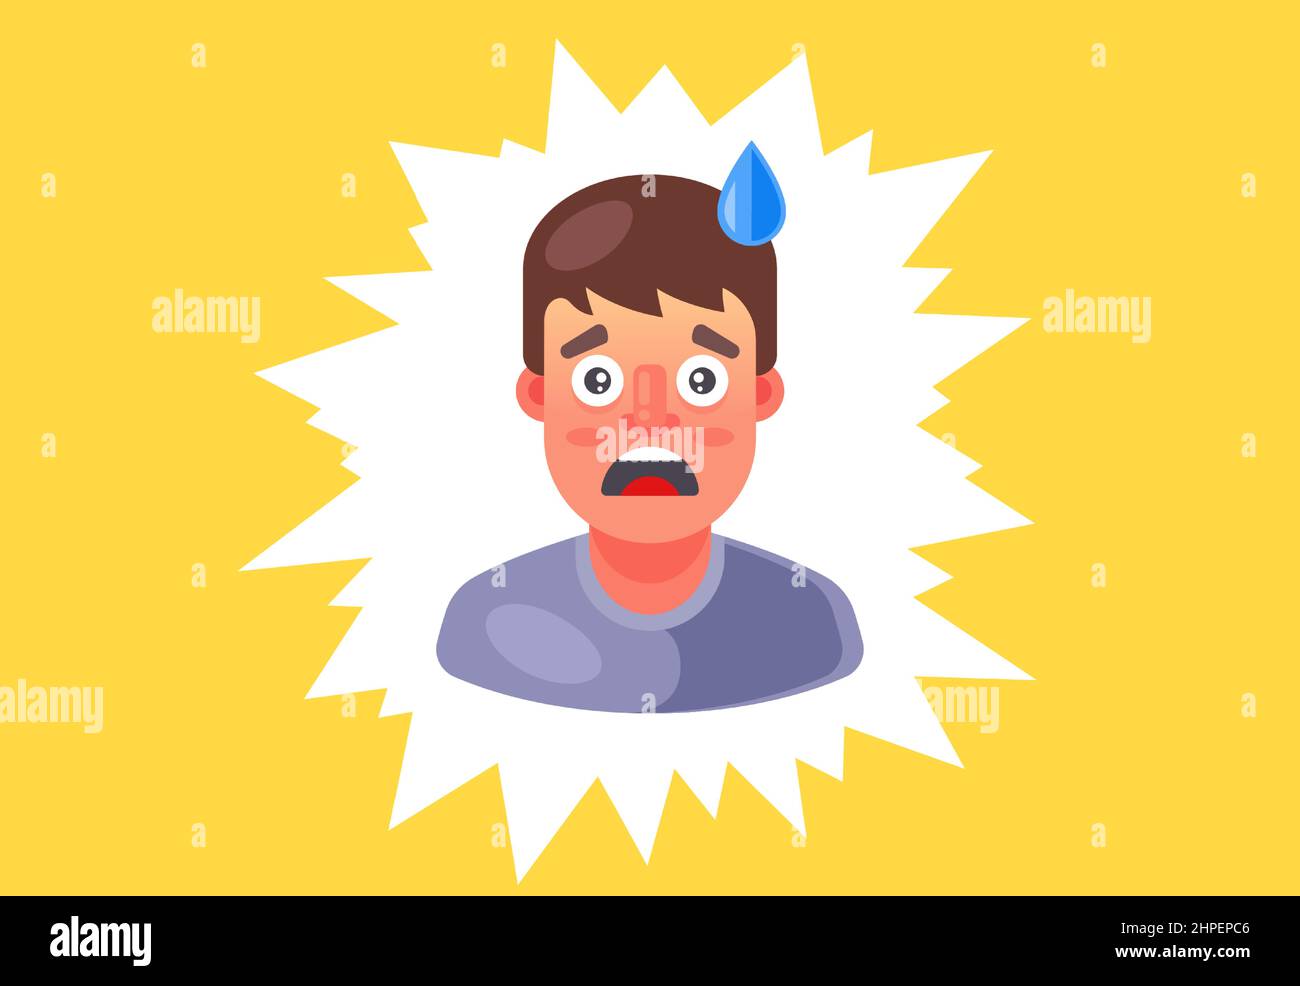 the man got scared and sweat runs down his forehead. emotion of surprise. flat vector illustration. Stock Vector